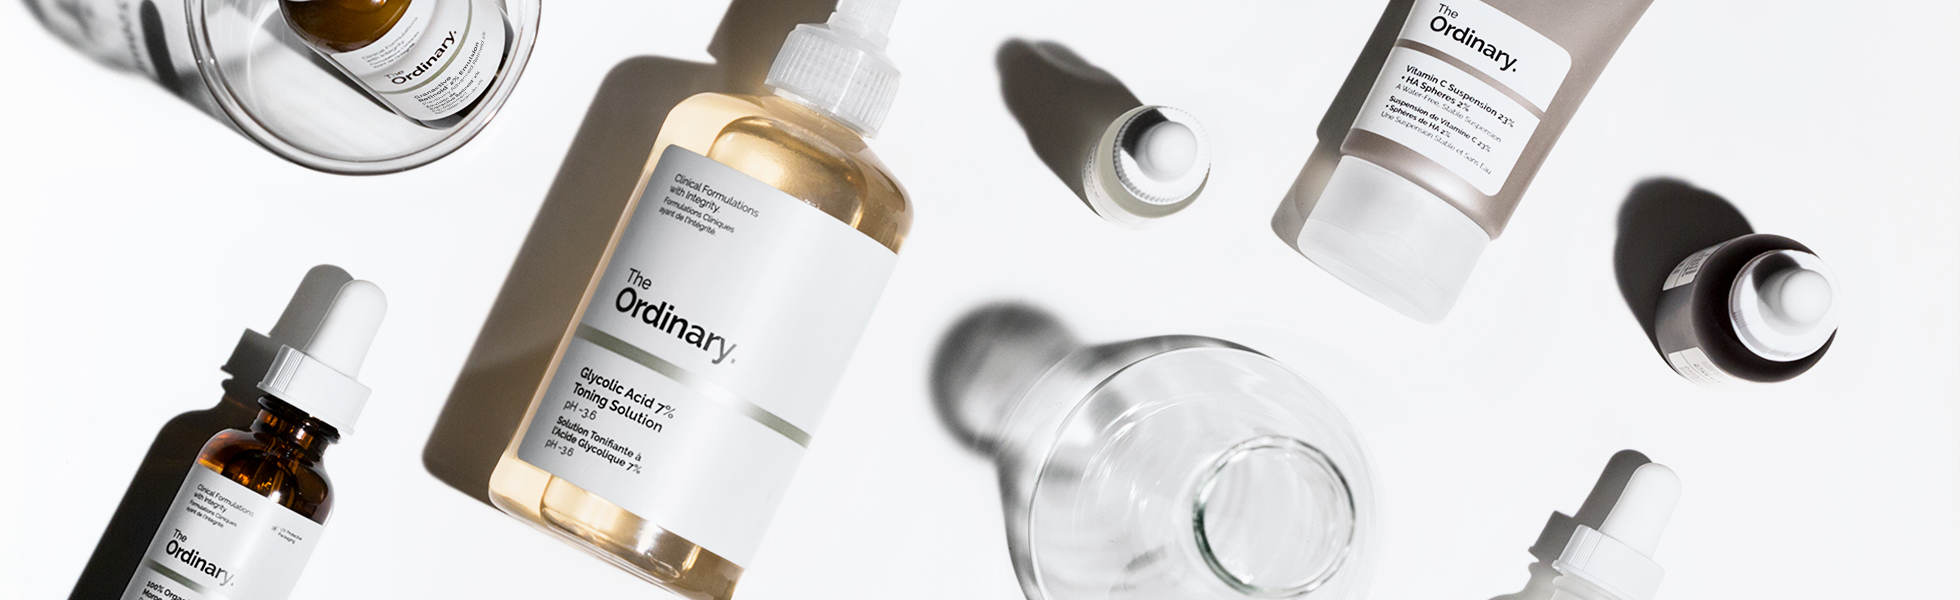 How To Build A Skincare Routine Using The Ordinary